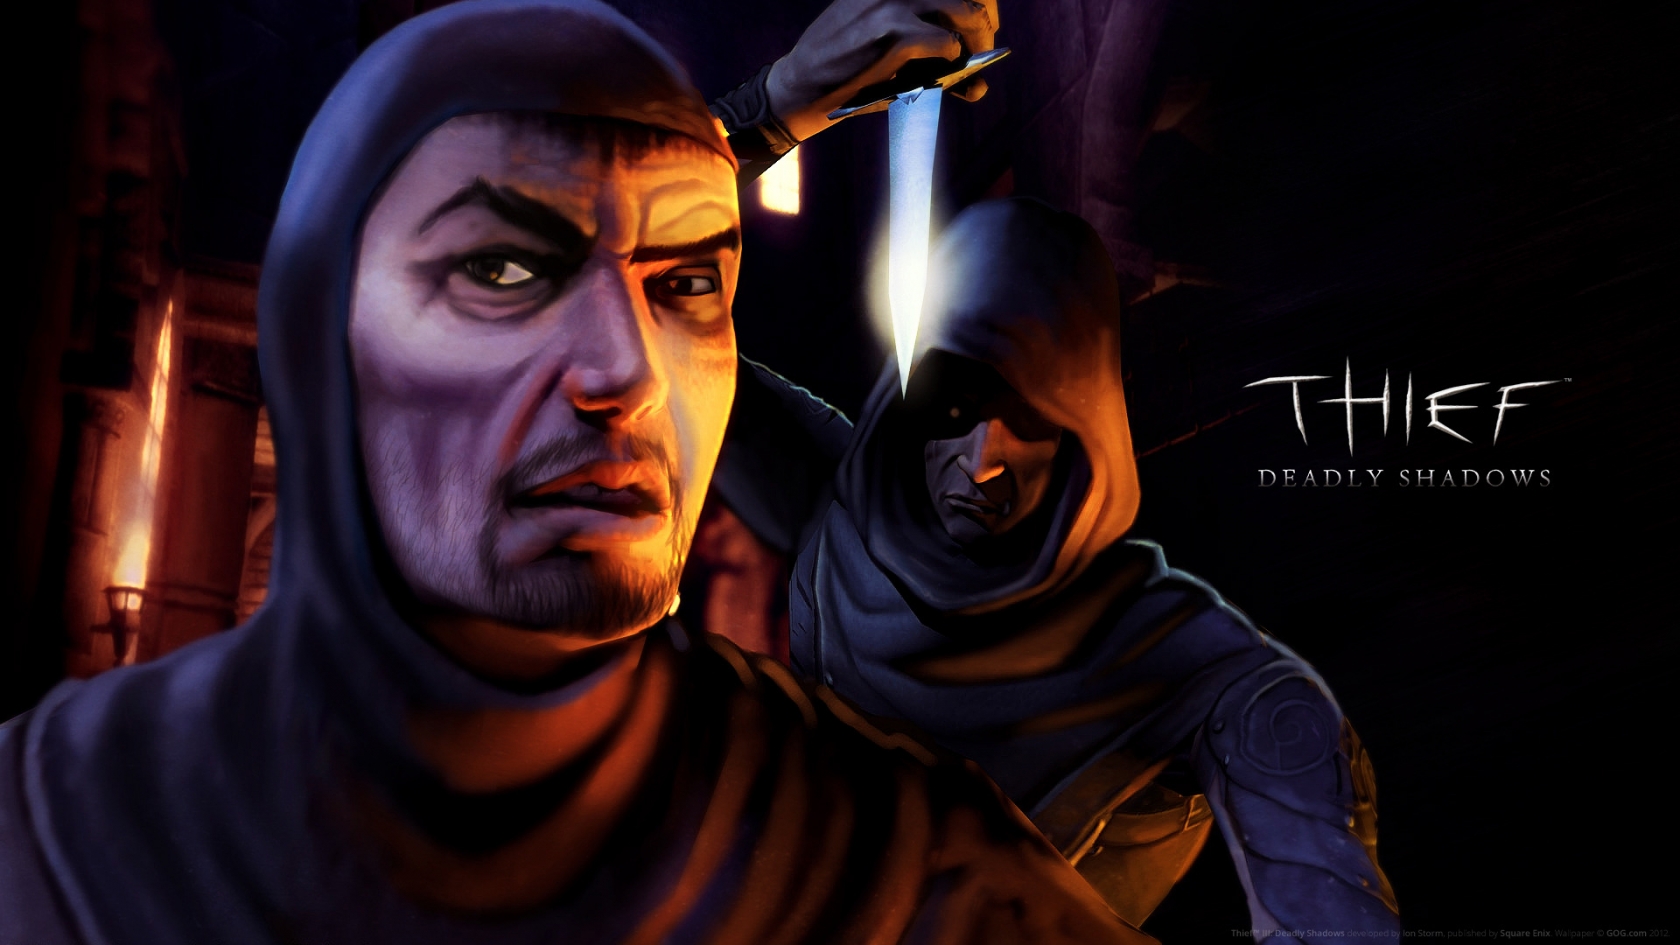 Thief Deadly Shadows for 1680 x 945 HDTV resolution